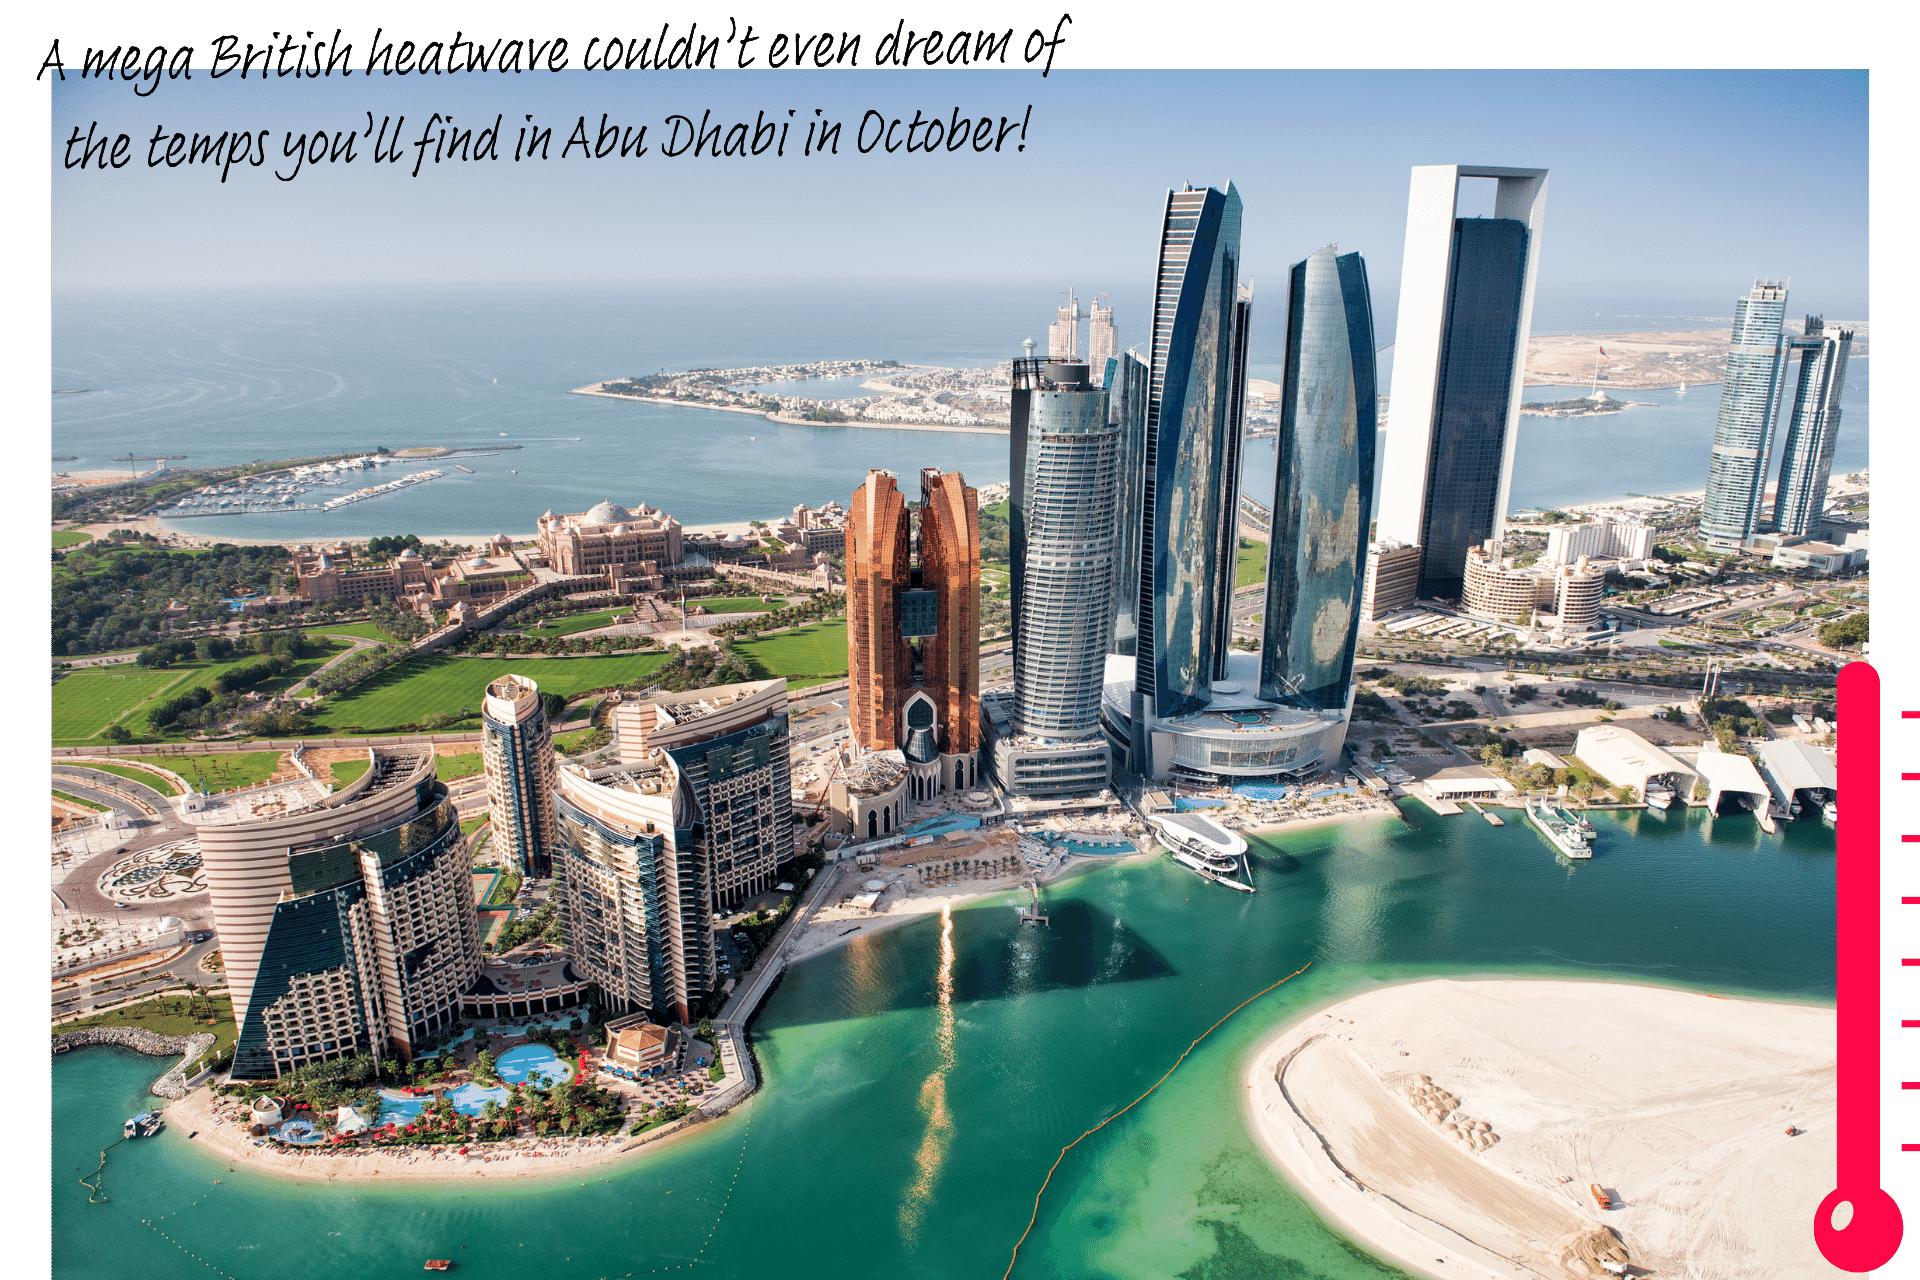 Where's hot in October? Bird's eye view of Abu Dhabi skyline and the sea beyond.